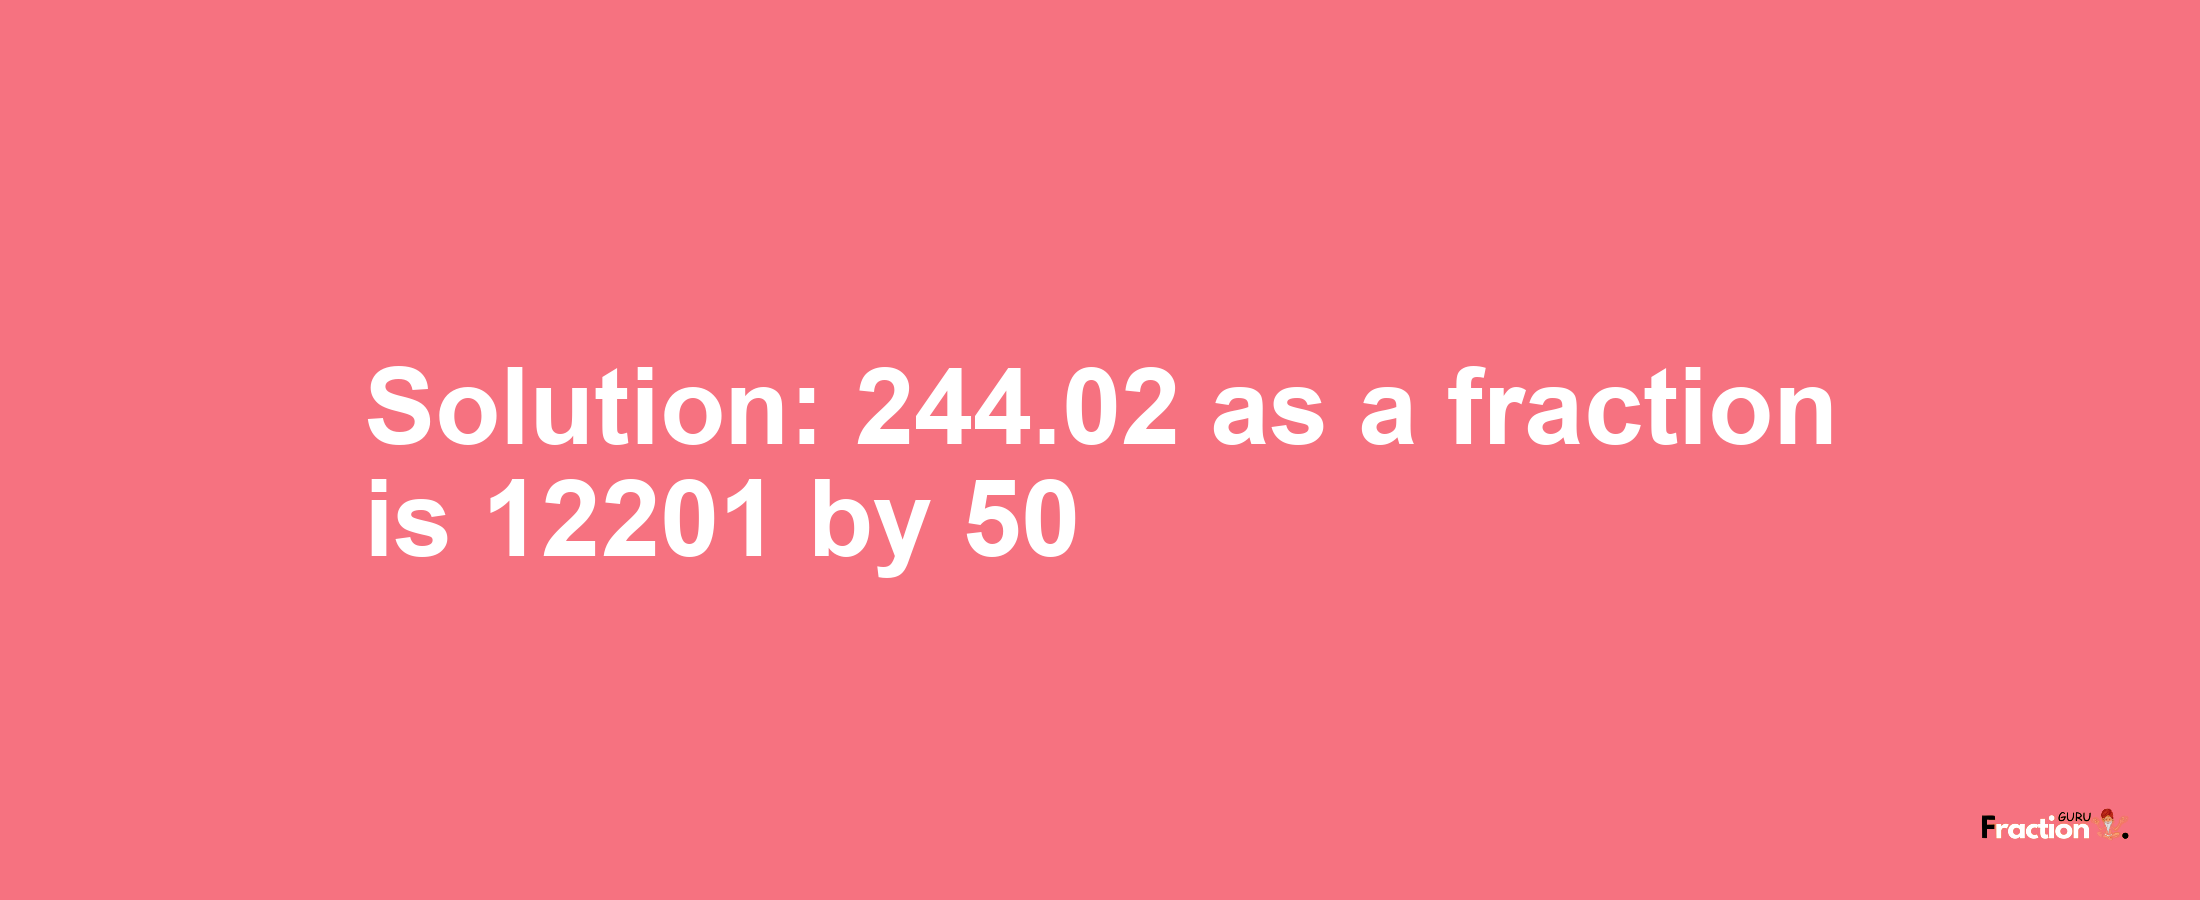 Solution:244.02 as a fraction is 12201/50